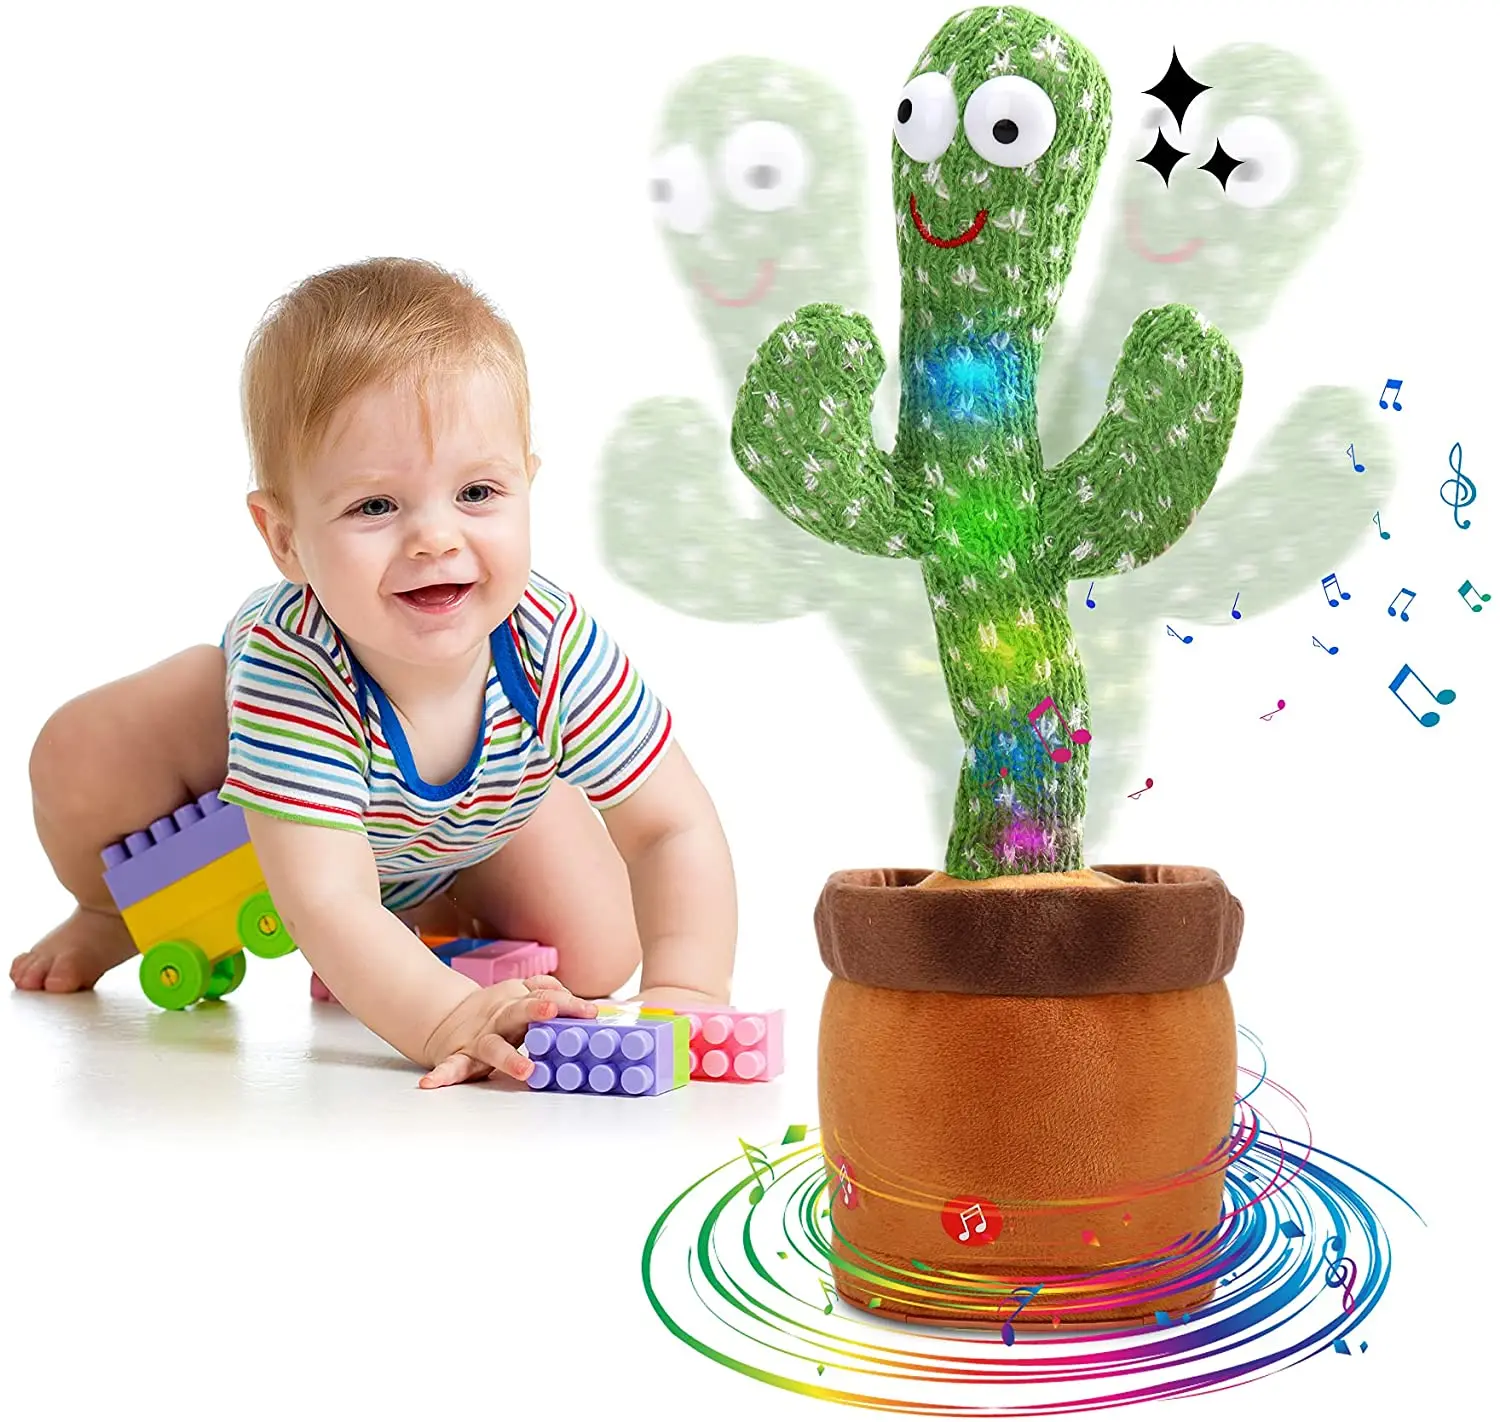 

Dancing Cactus Toys Repeat What You Say Singing Cactus Toy Education Toys Electric Mimicking Cactus Plush Unisex USSE006 CN;GUA